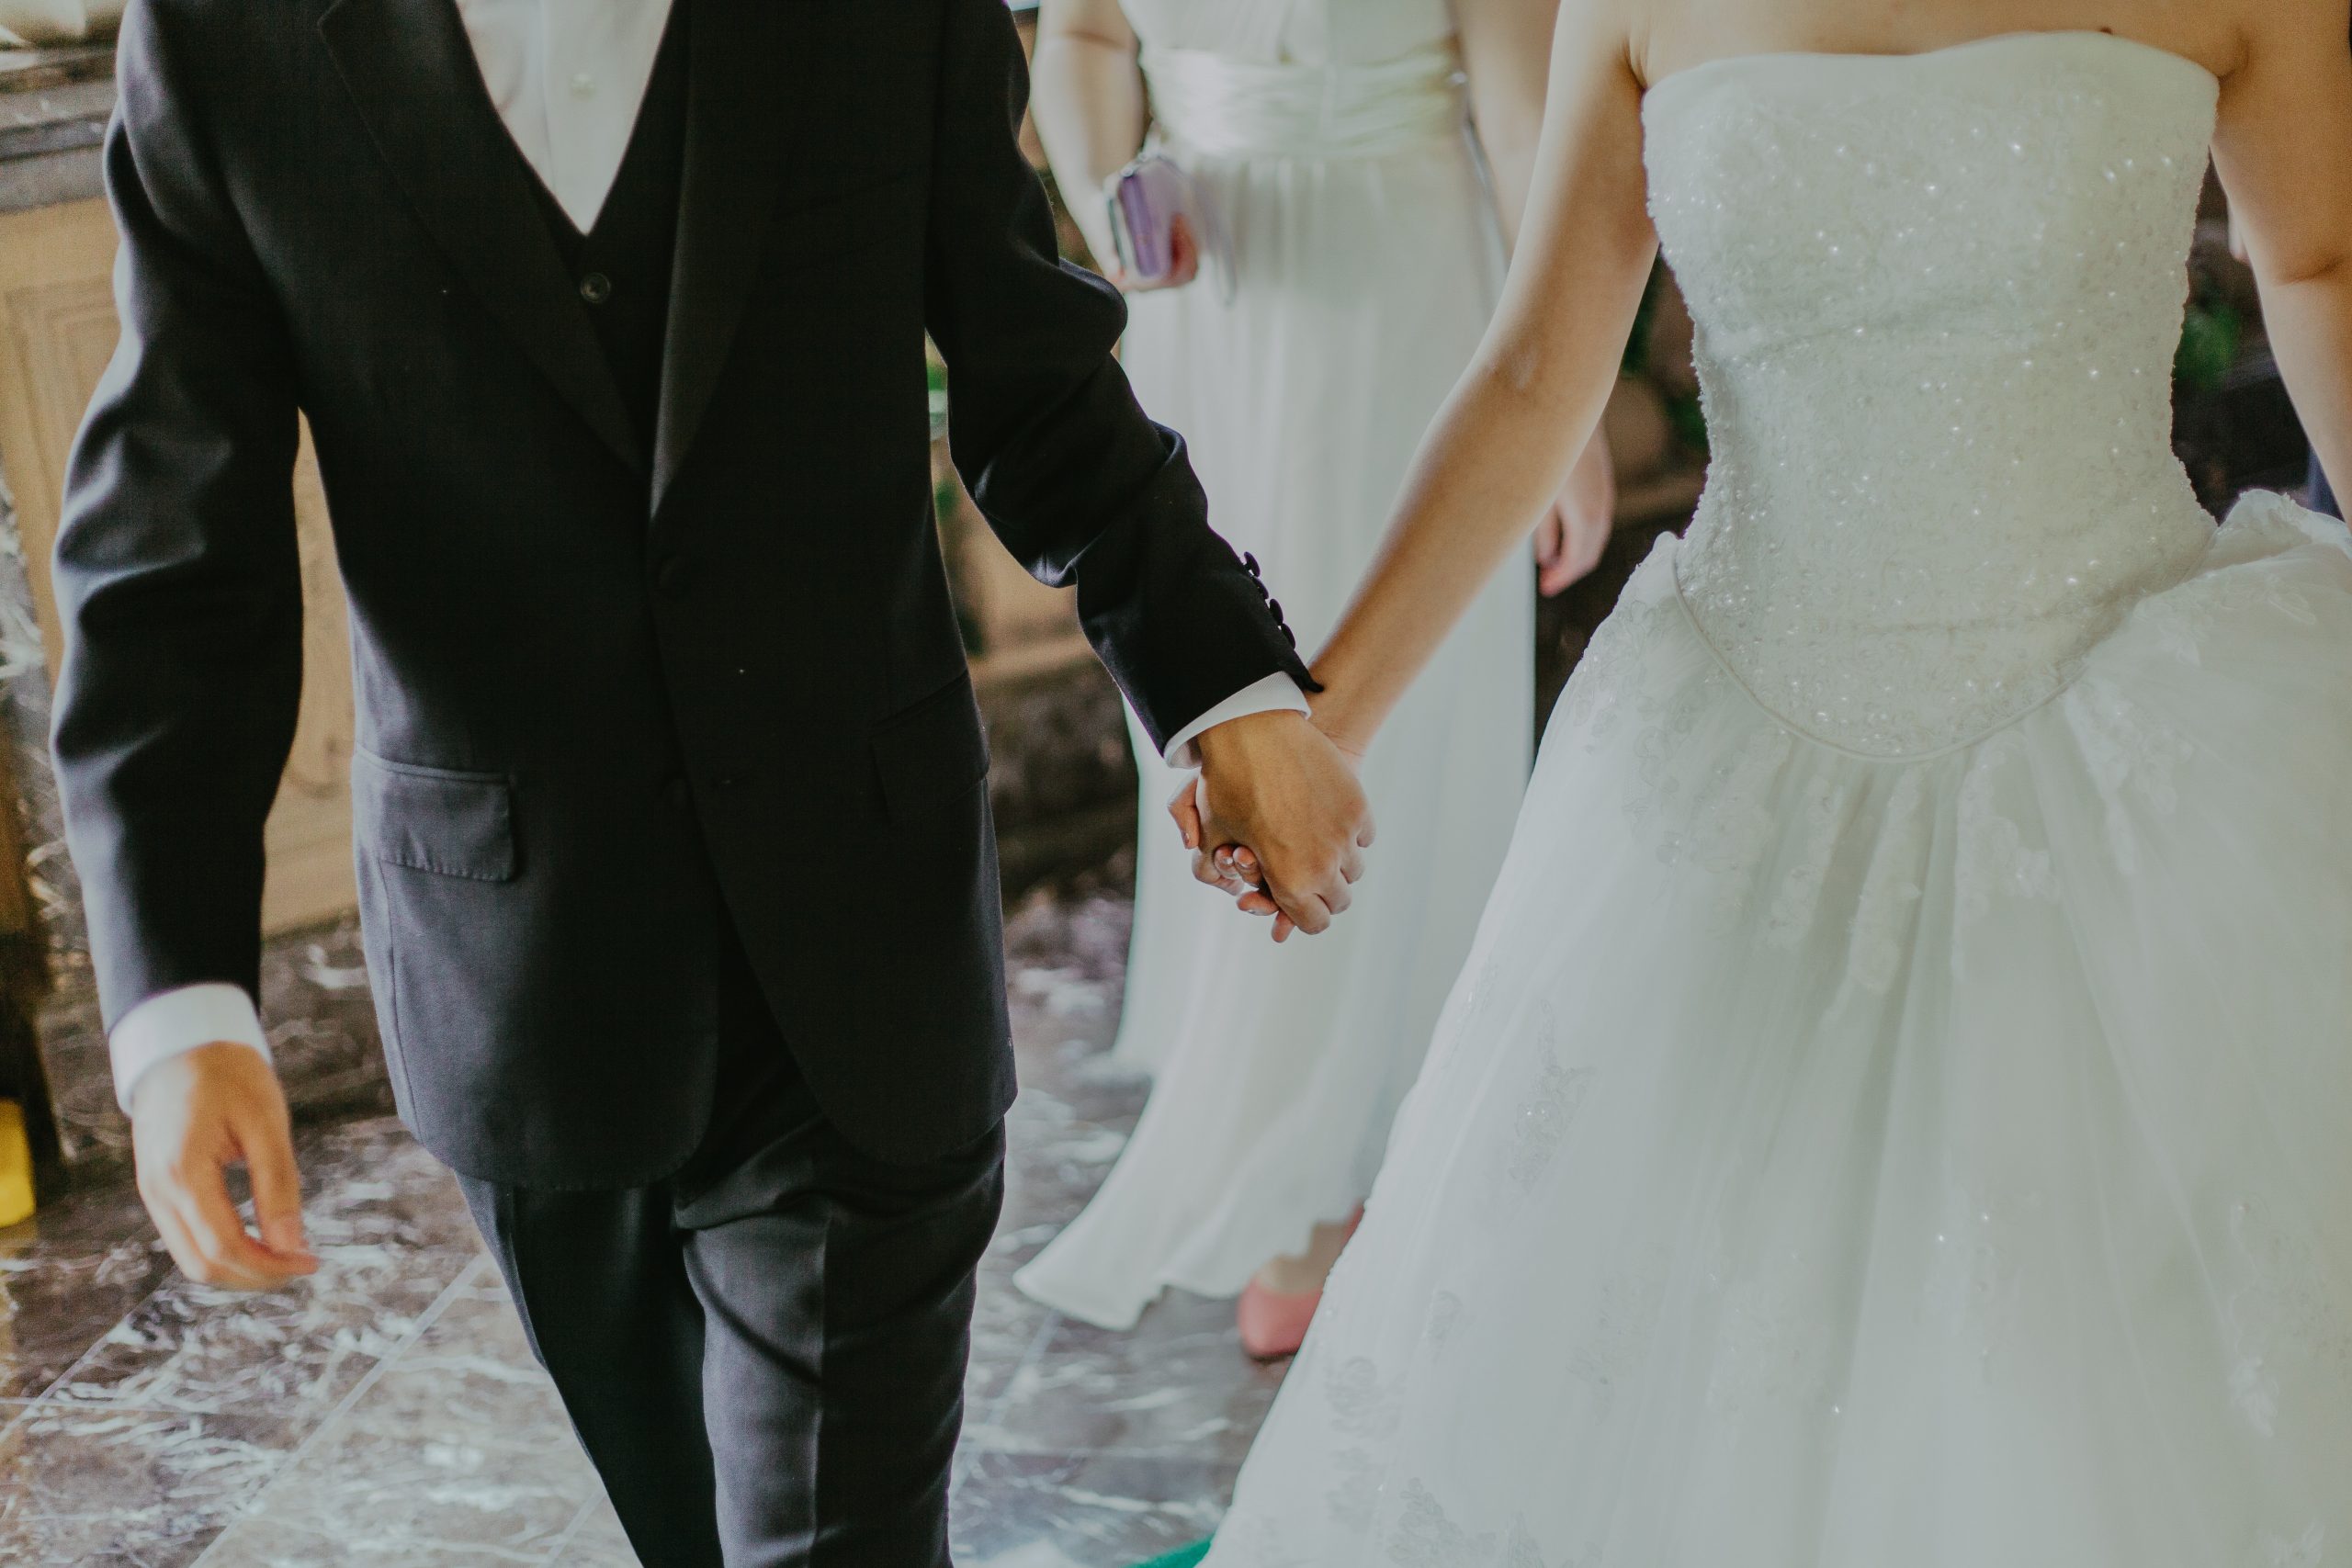 5 Important Tips On How to Plan a Wedding Under $10,000